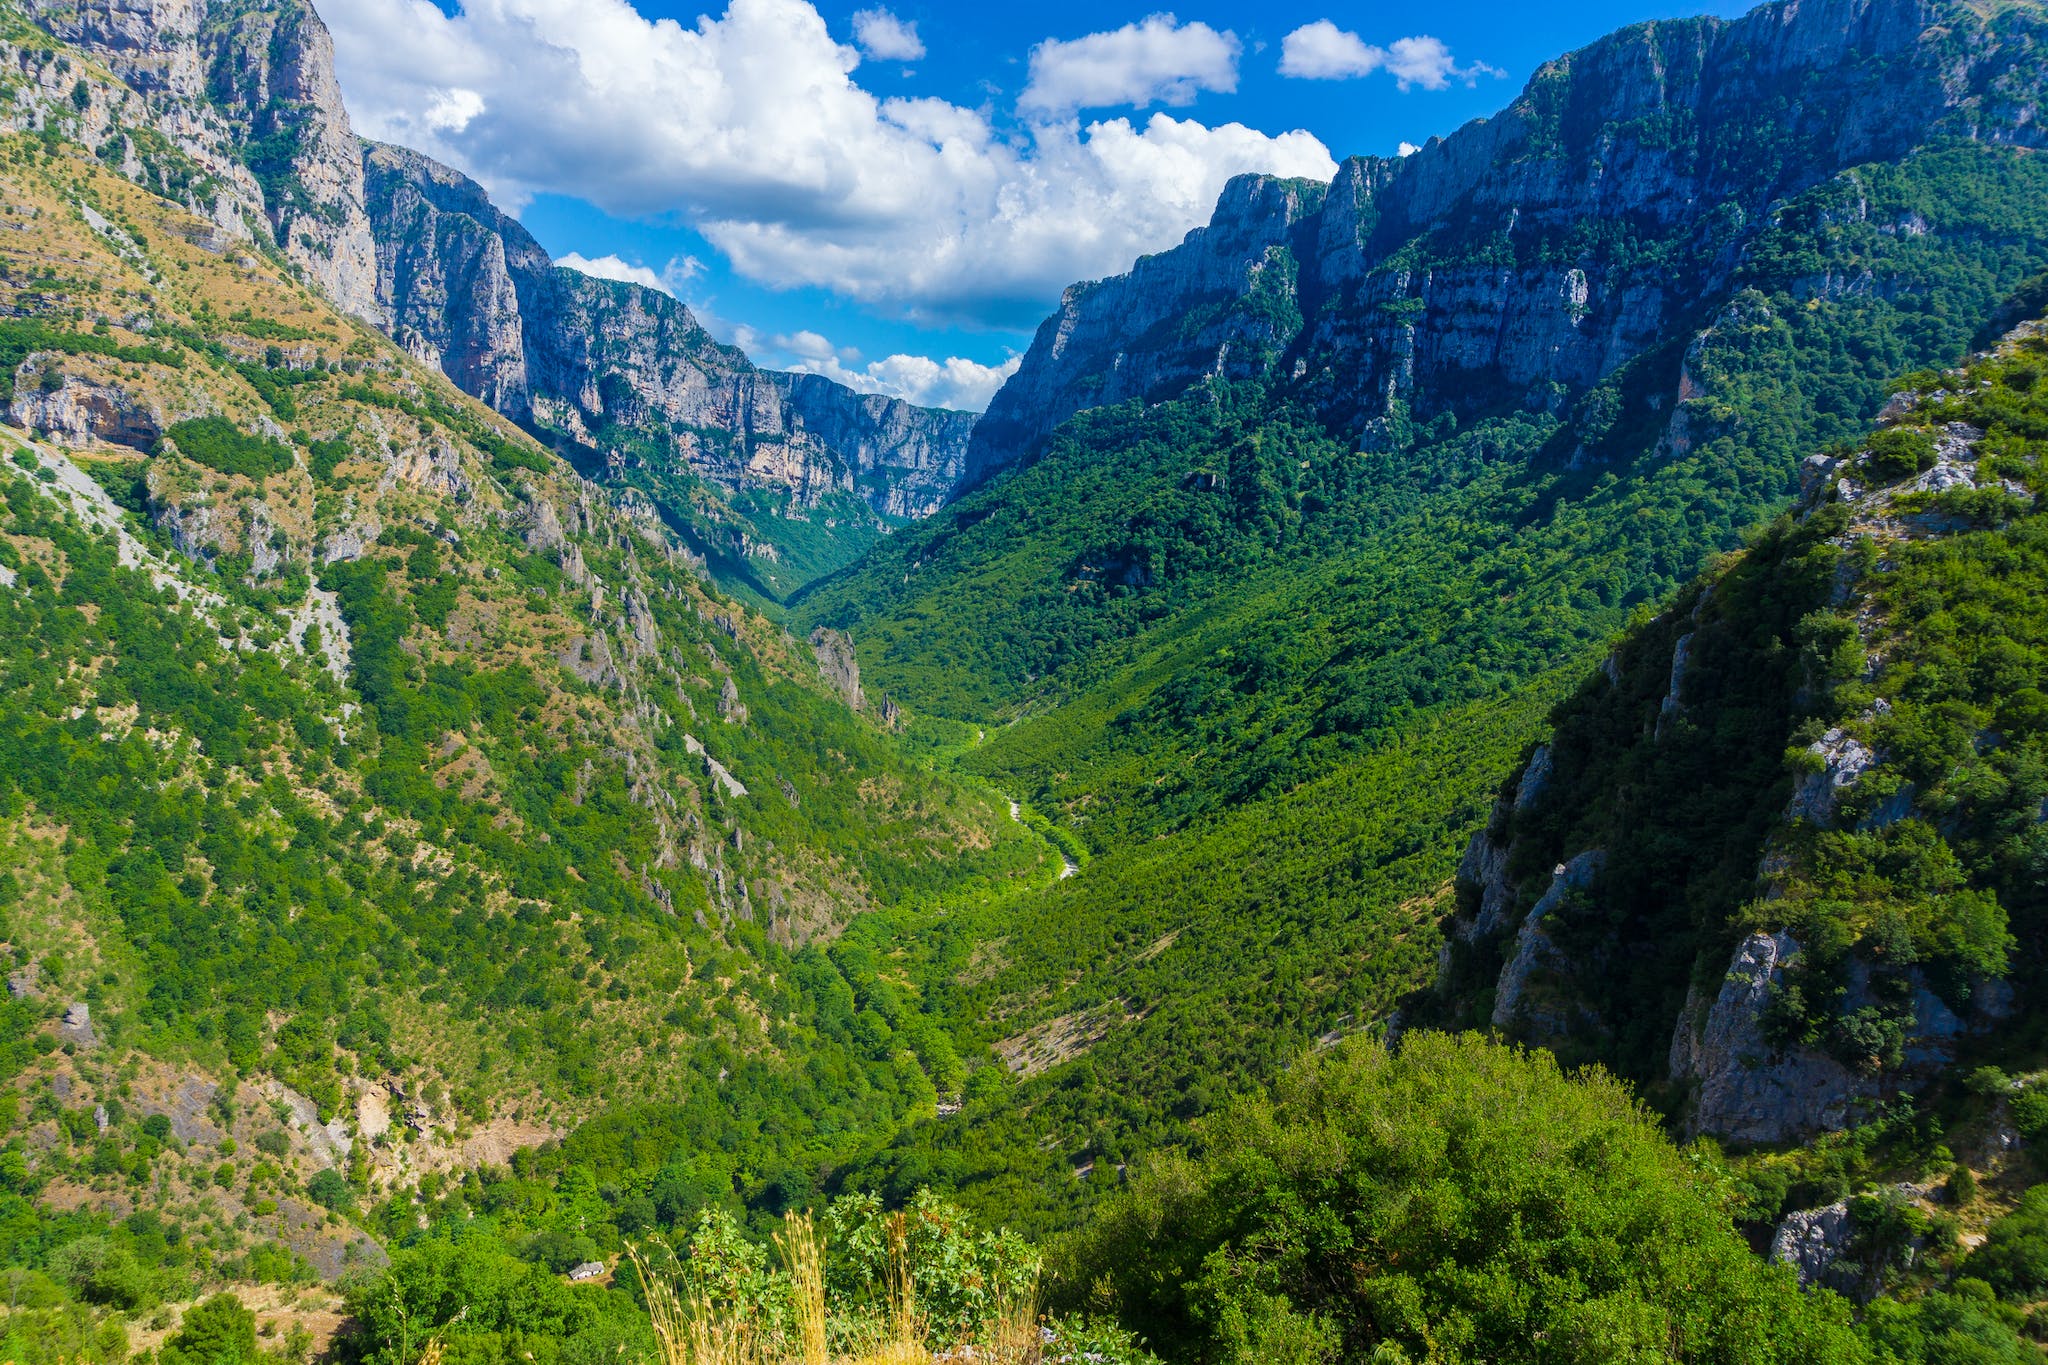 The cliffs and forests of Vikos Gorge. Photo: Getty.